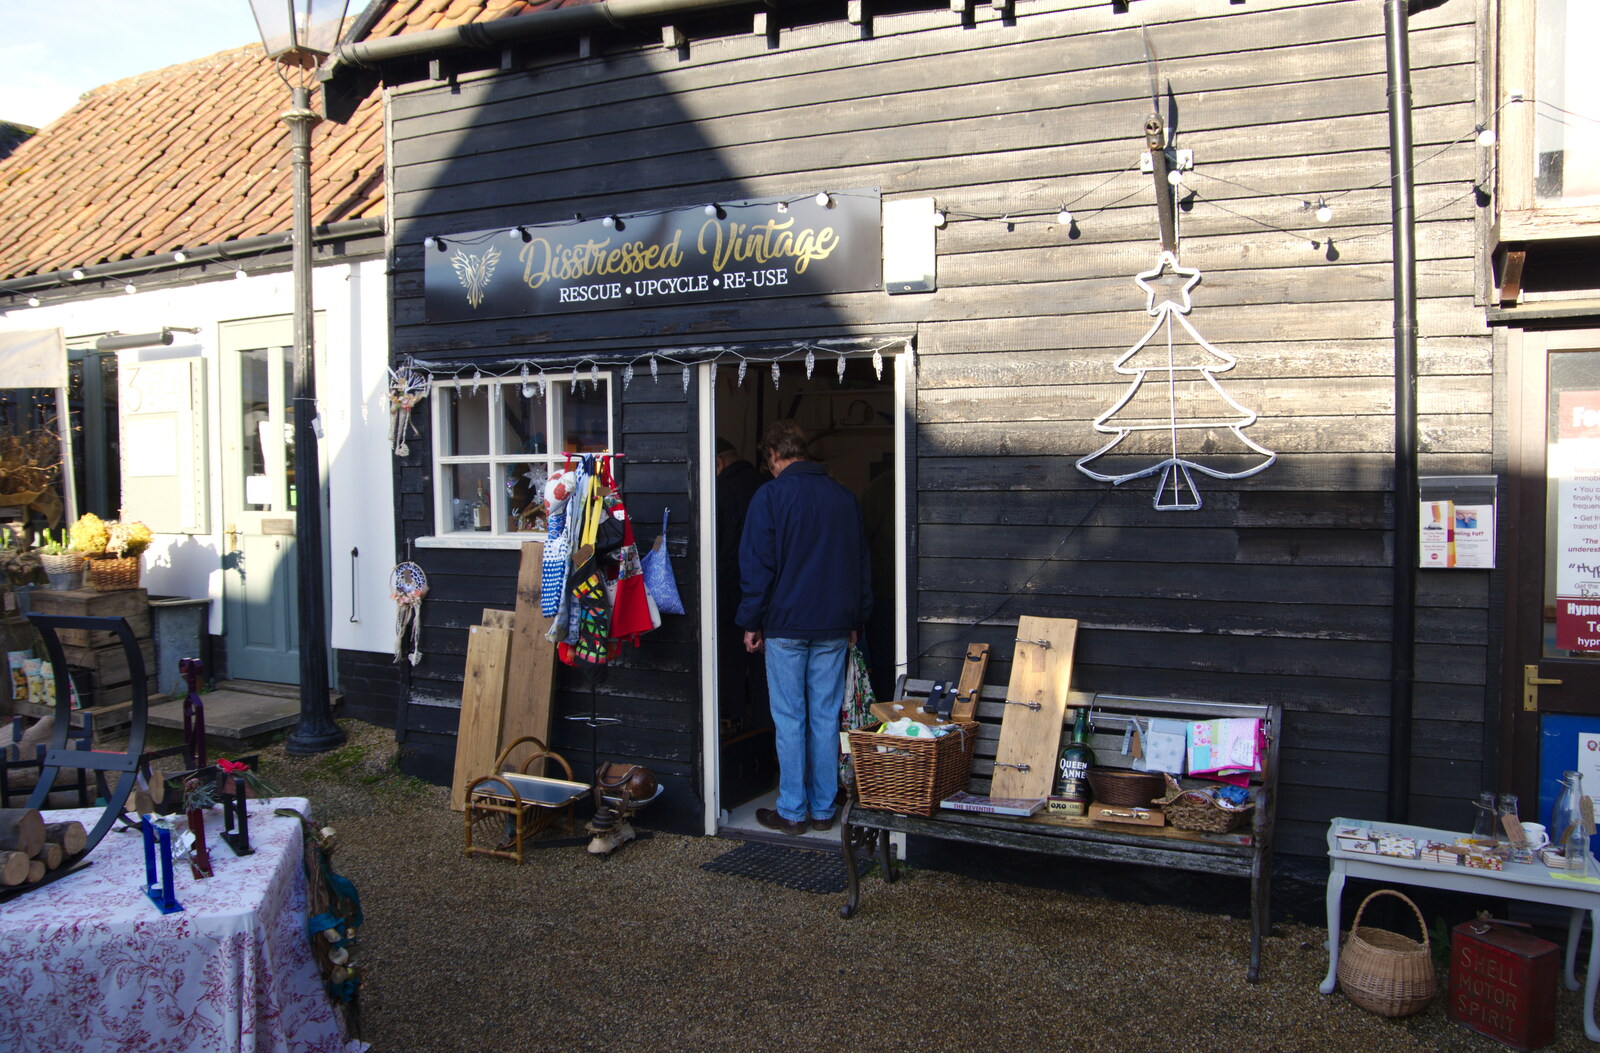 A vintage shop from The St. Nicholas Street Winter Fayre, Diss, Norfolk - 14th December 2019